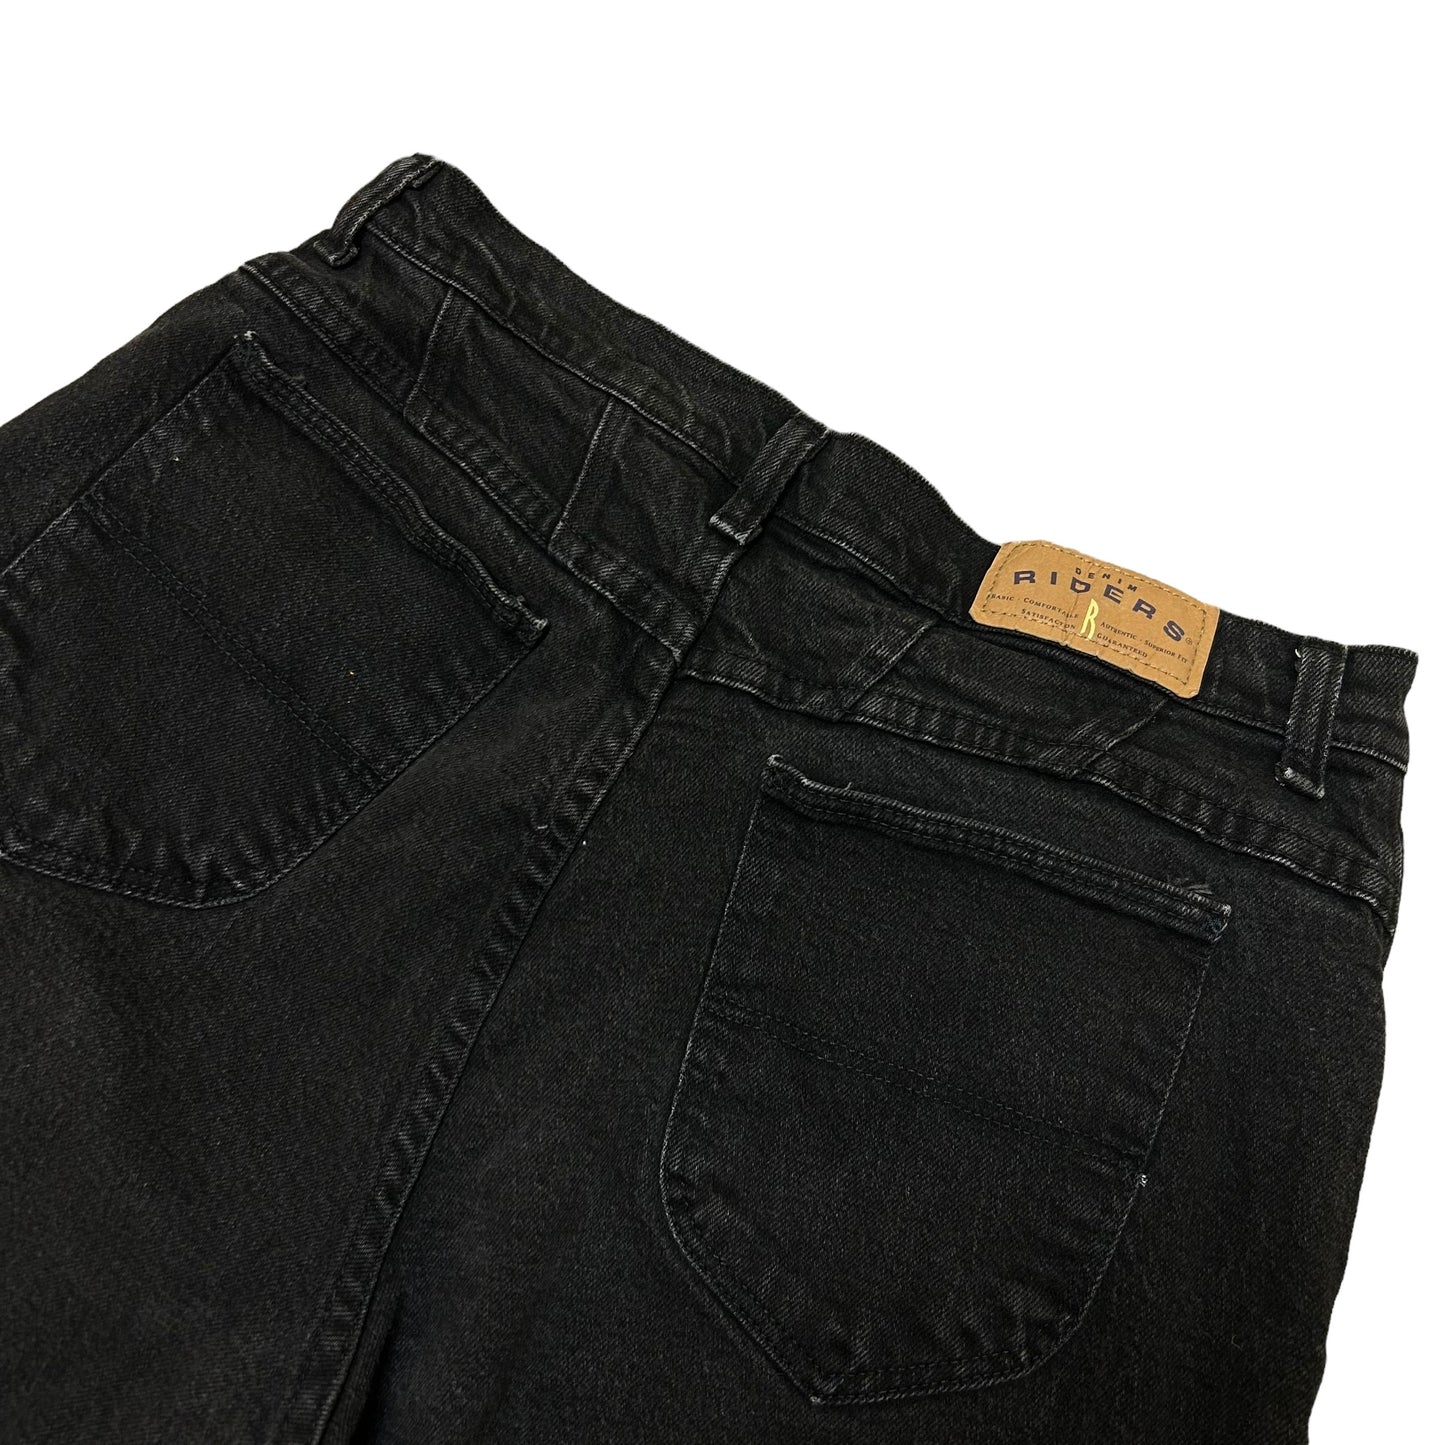 Vintage 1990s Riders Black Tapered Slim Fit Jeans - Size 30” x 28”